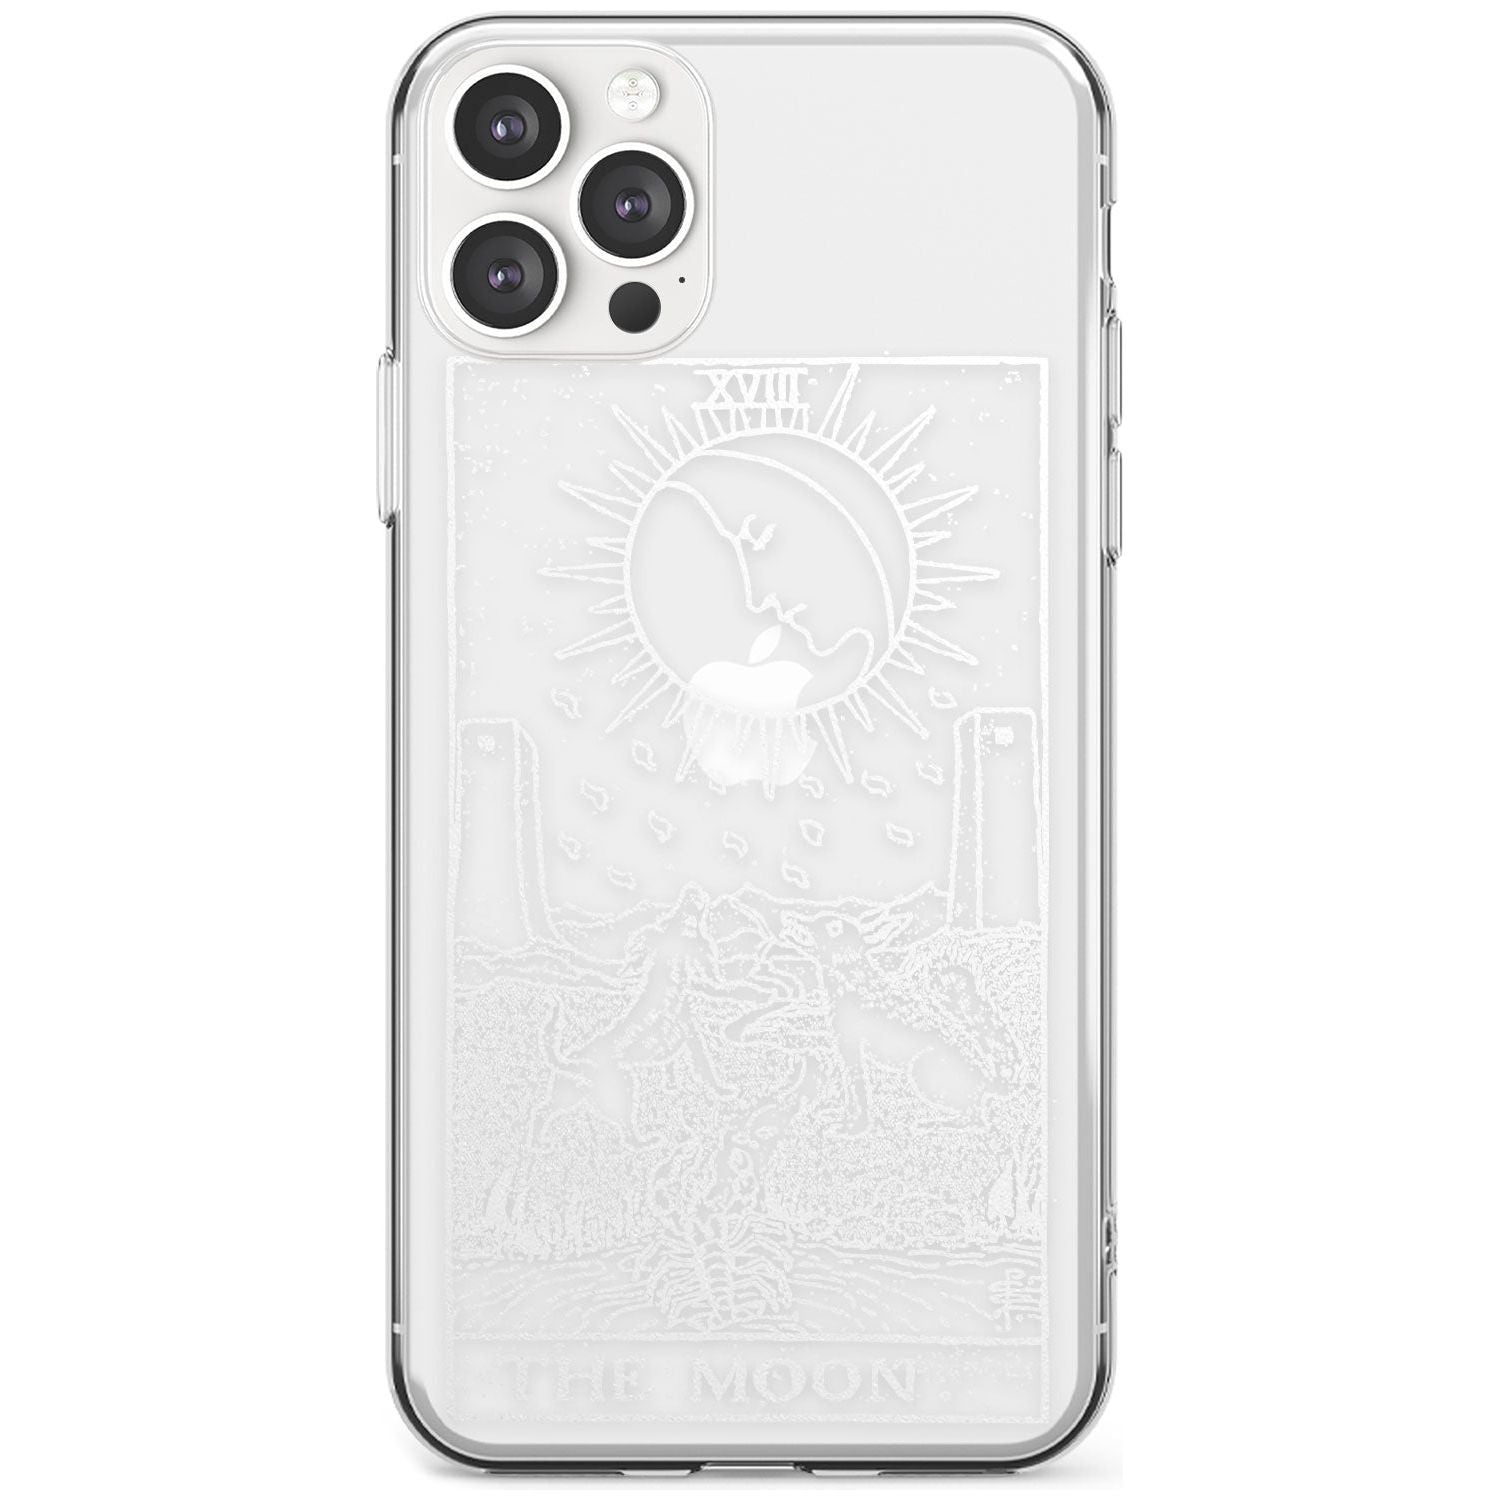 The Moon Tarot Card - White Transparent Black Impact Phone Case for iPhone 11 Pro Max